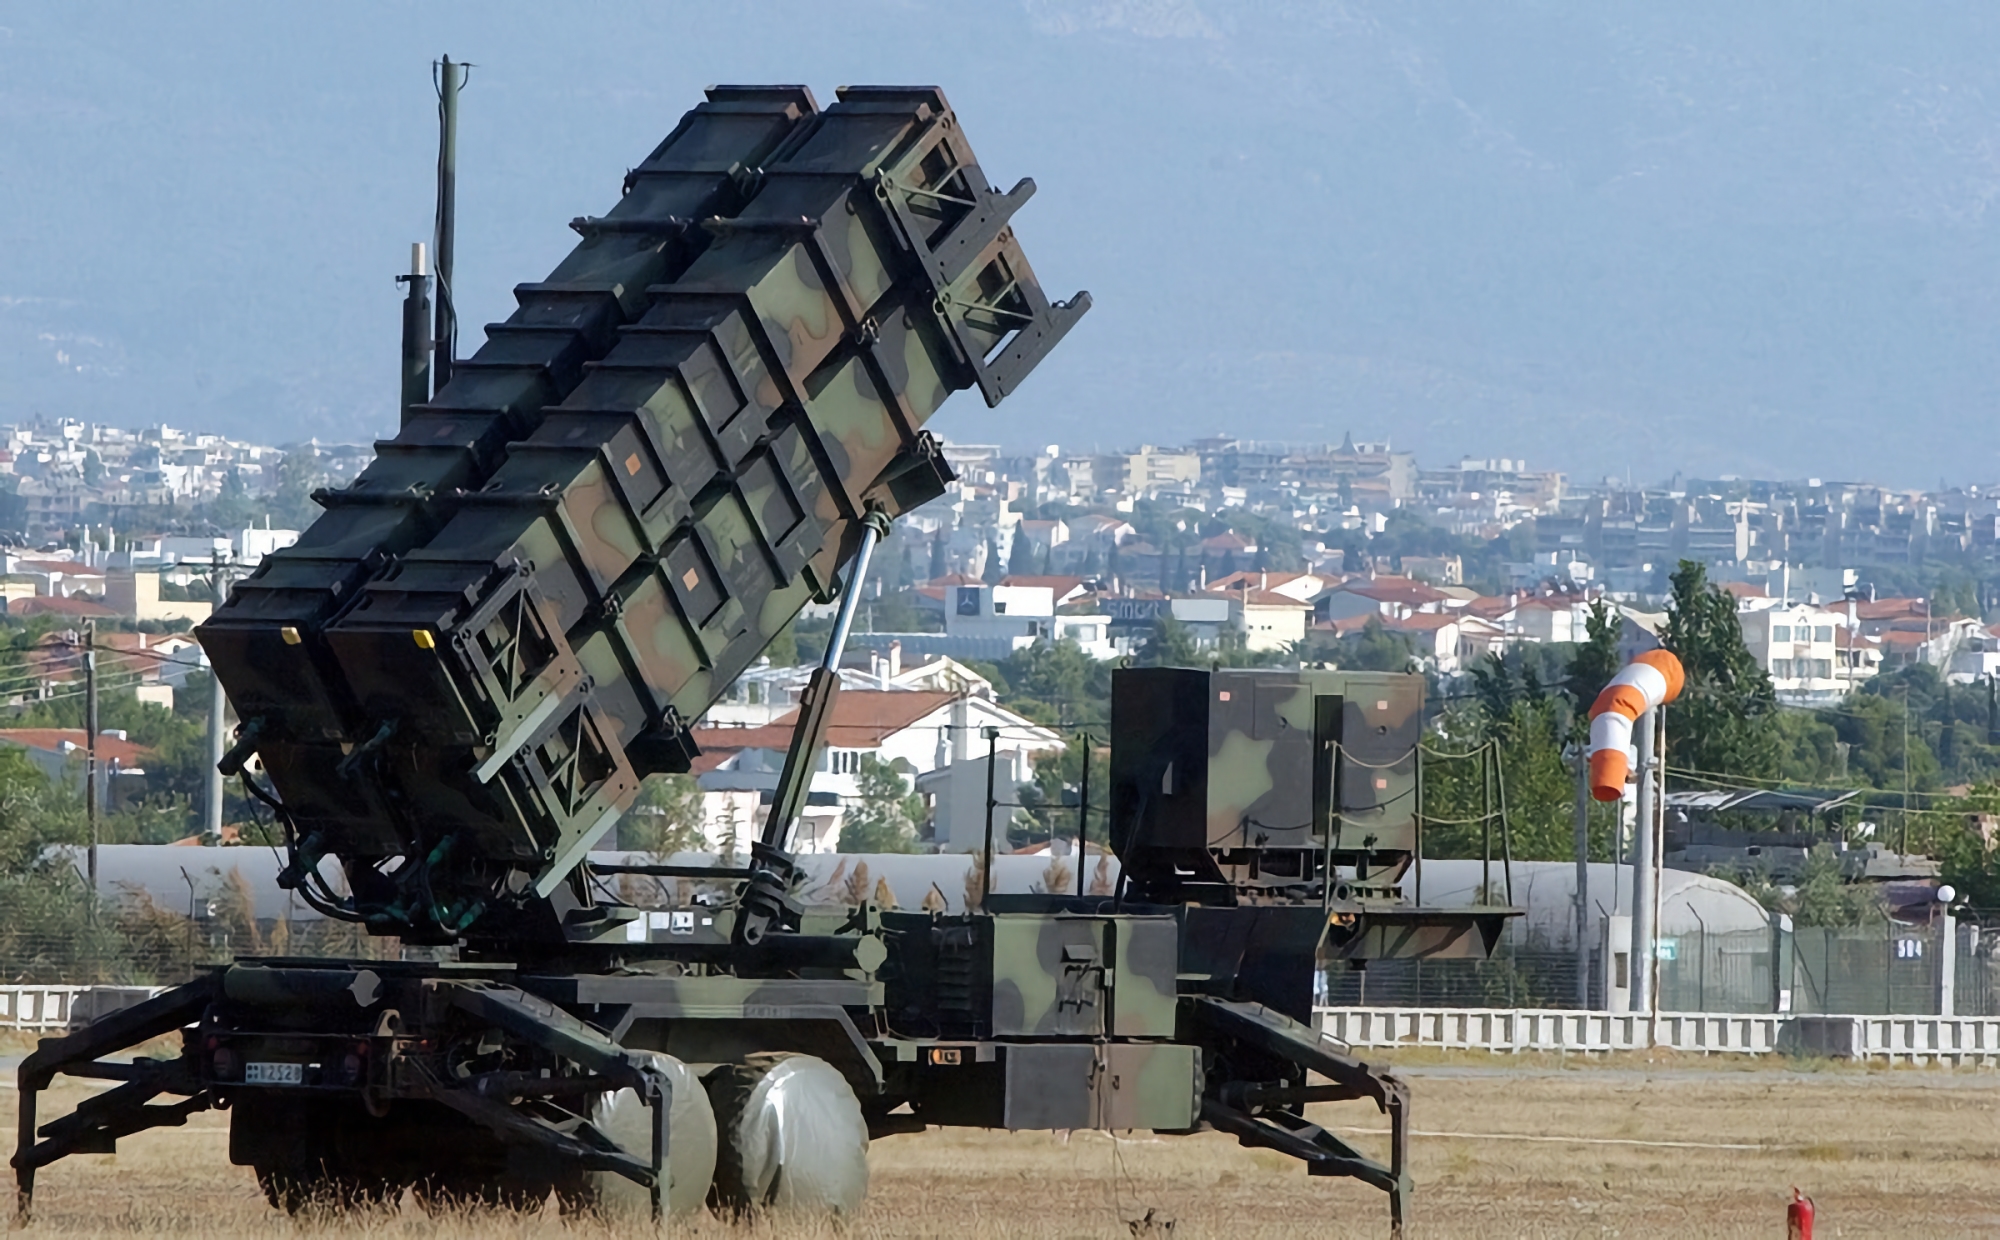 Media: Greece may transfer Patriot surface-to-air missile system in PAC-3 modification to Ukraine